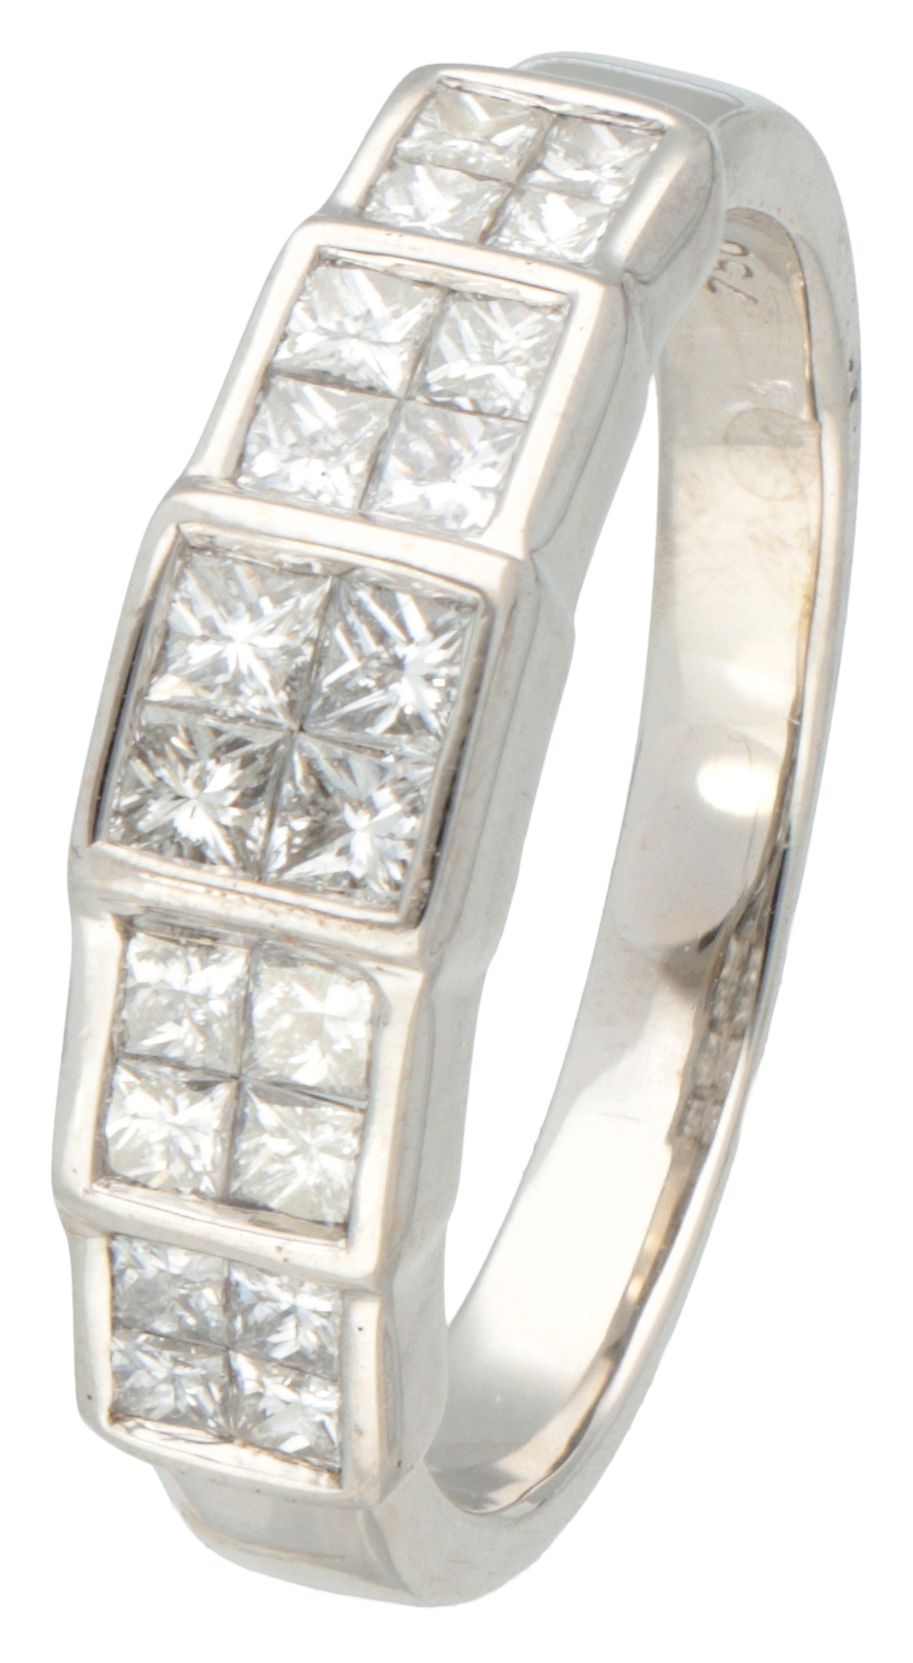 18K. White gold ring set with approx. 0.60 ct. Princess cut diamond. Sello: 750.&hellip;